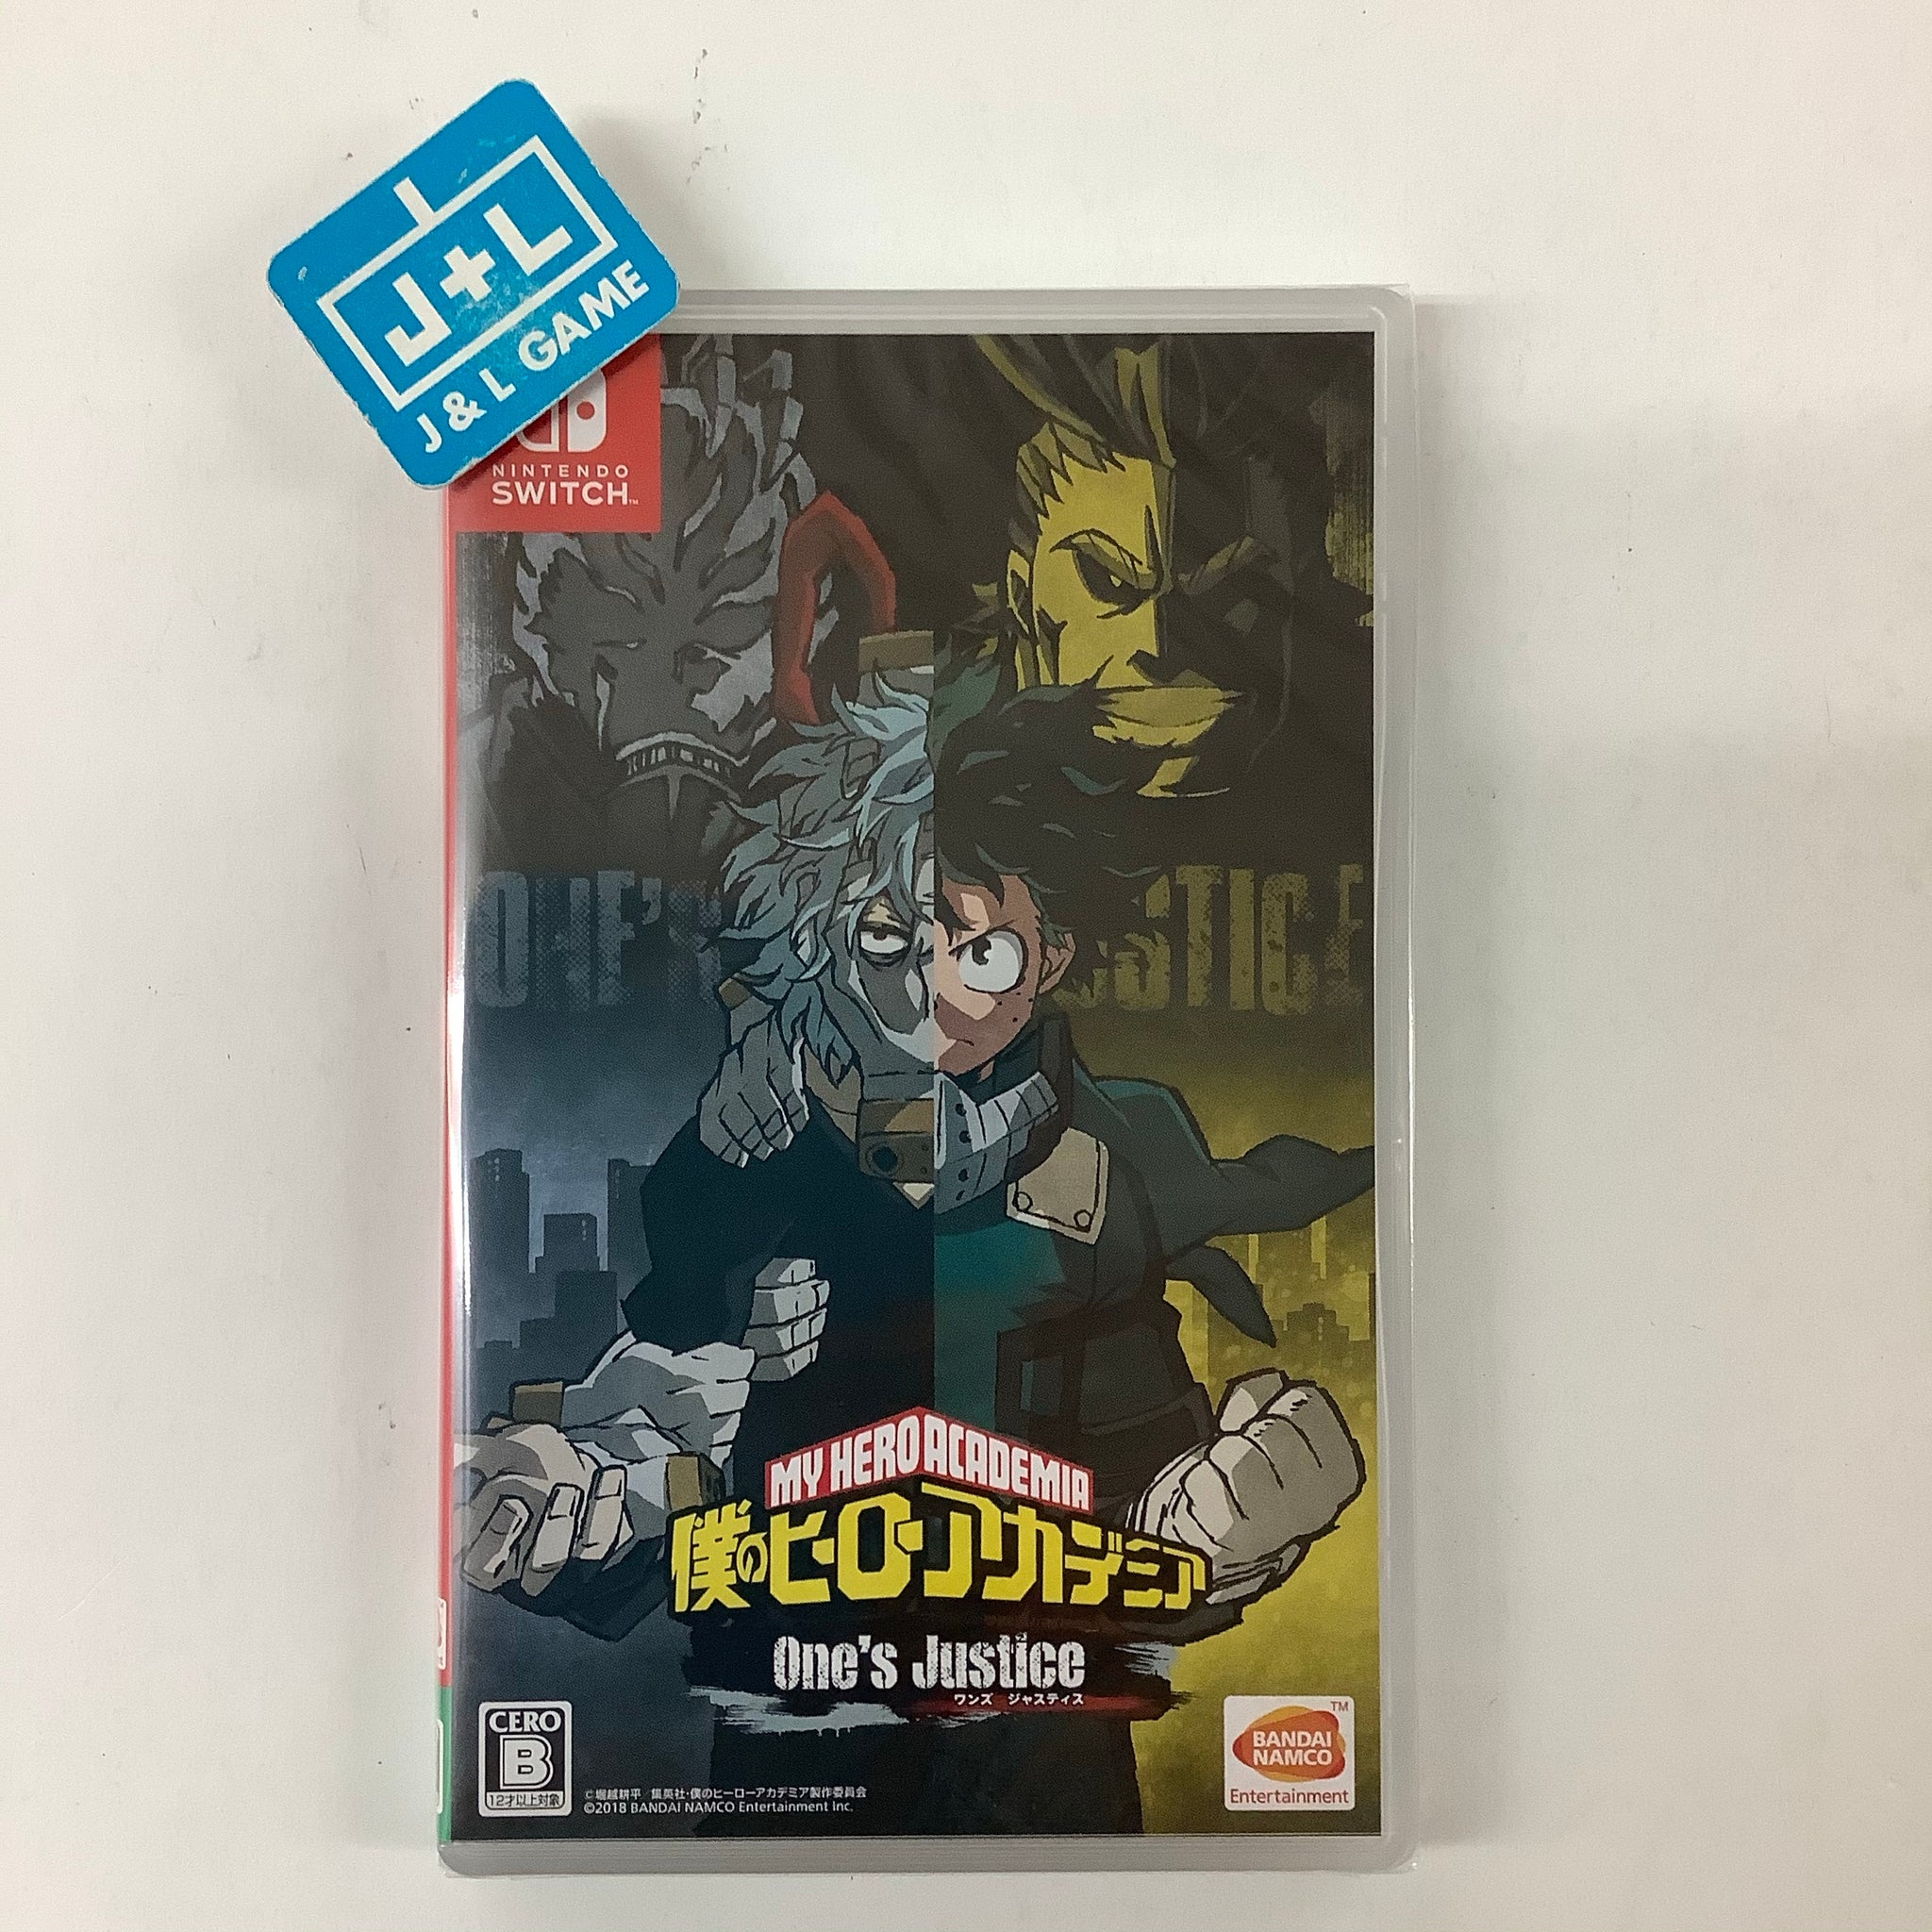 My Hero Academia: One's Justice - (NSW) Nintendo Switch (Japanese Import) Video Games Bandai Namco Games   